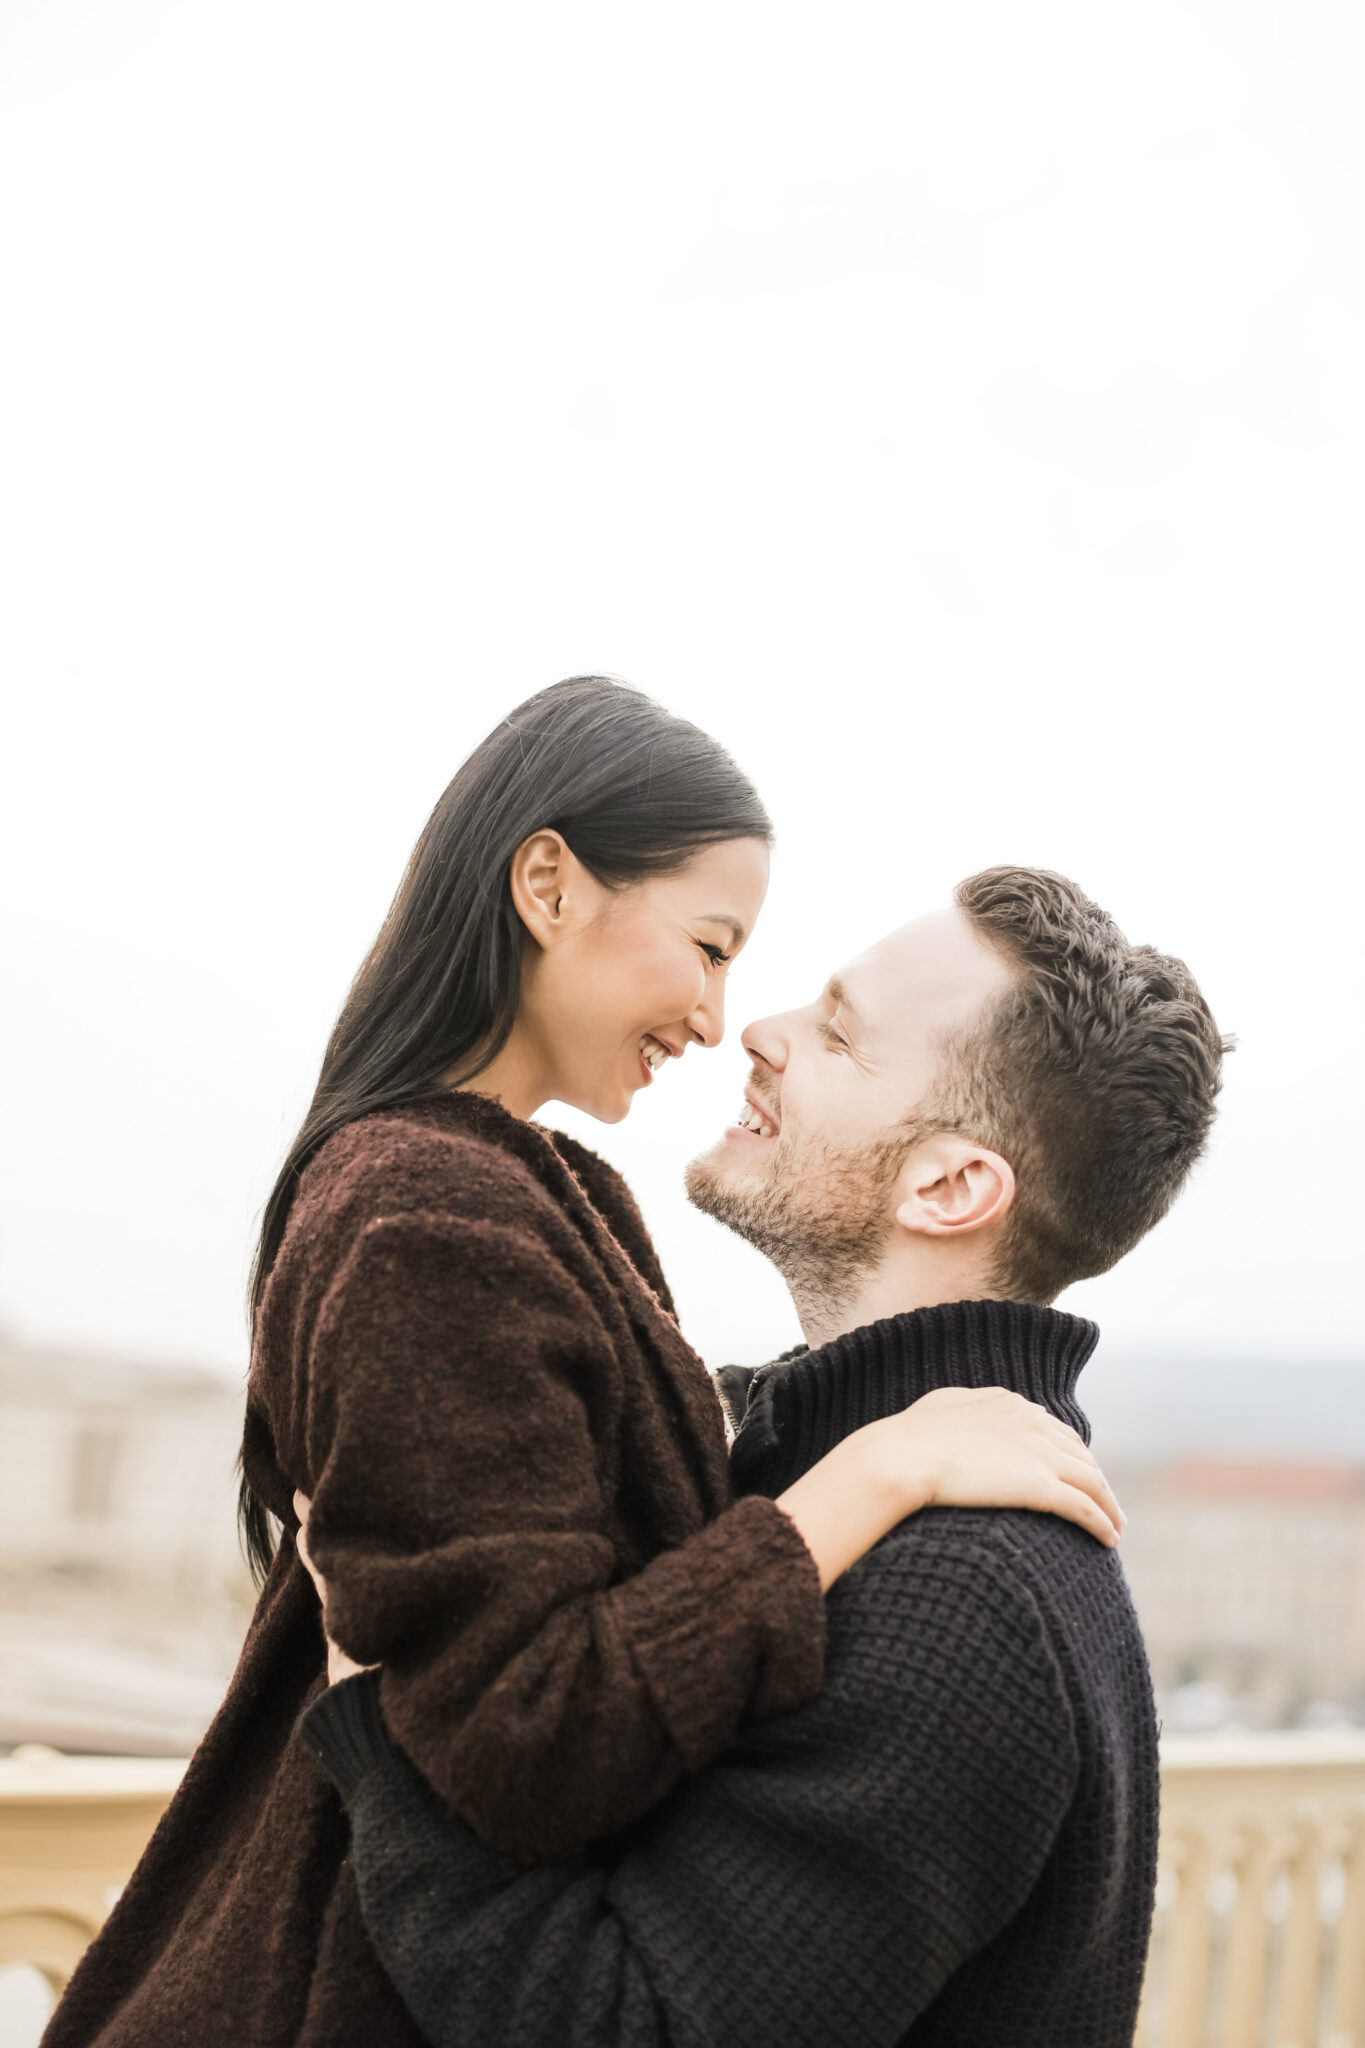 3 Tips for Building a Healthy Romantic Relationship